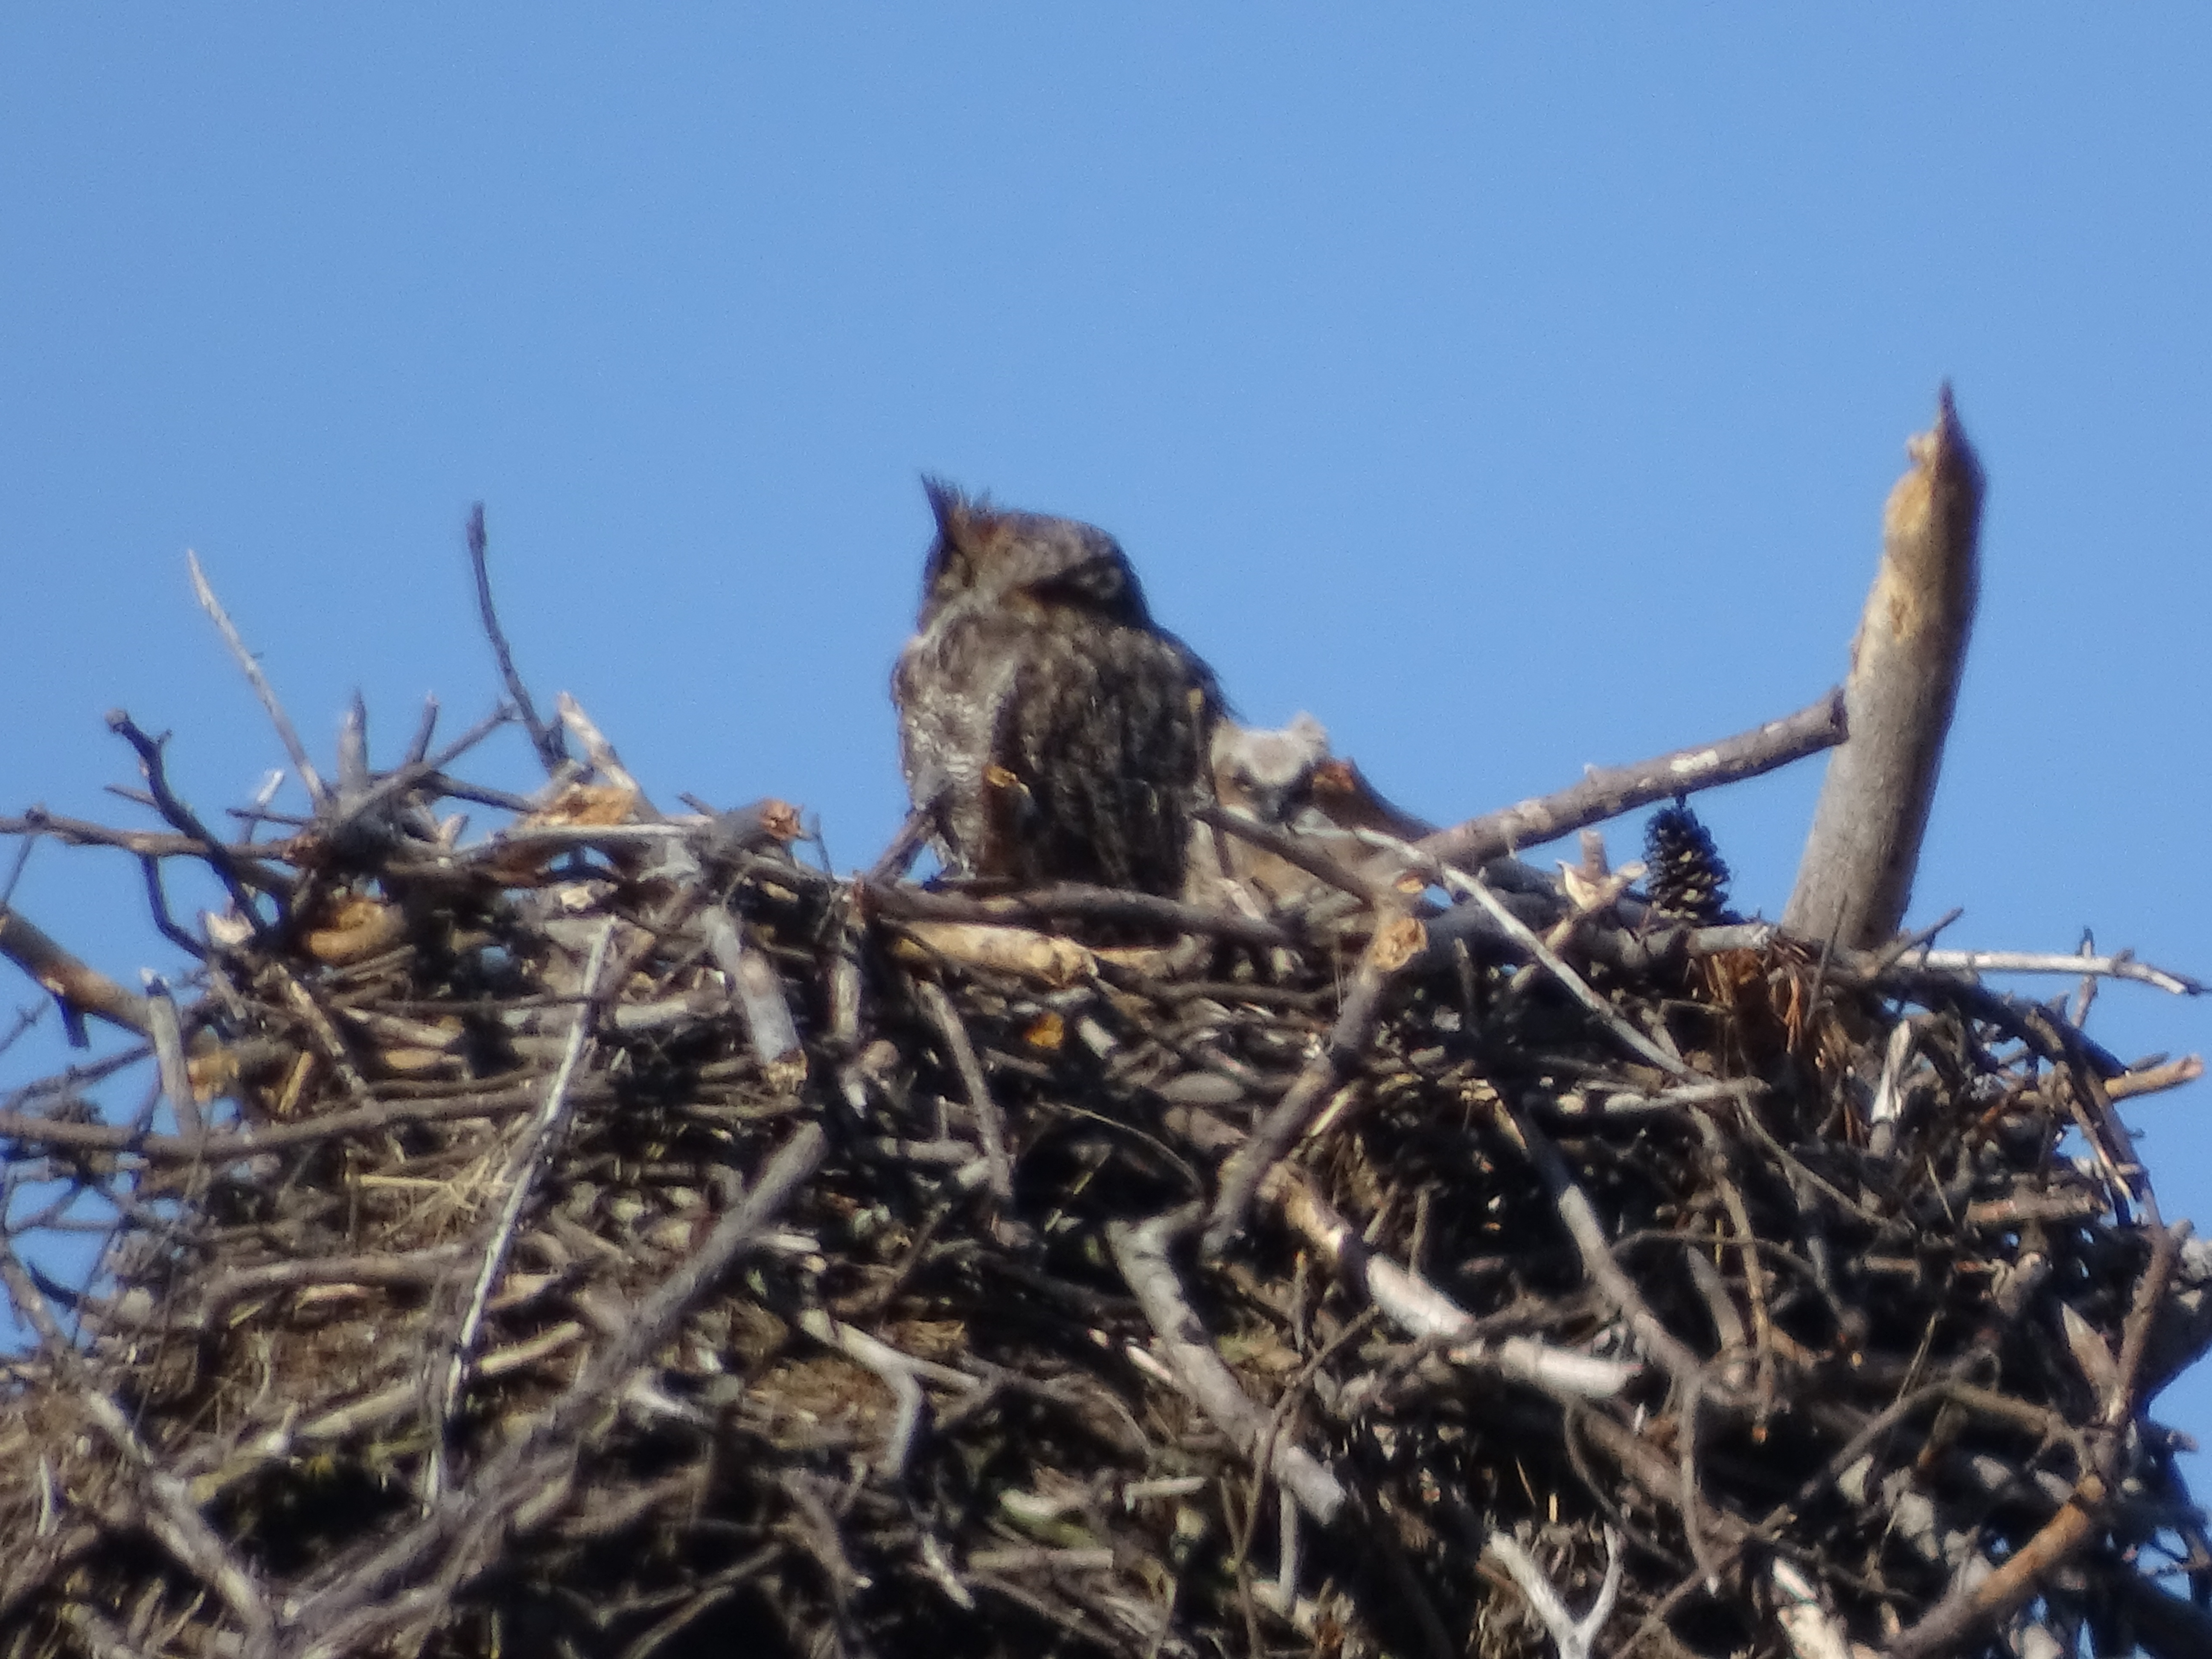 Horned owl and baby in an eagle's nest at Blackwater National Wildlife refuge